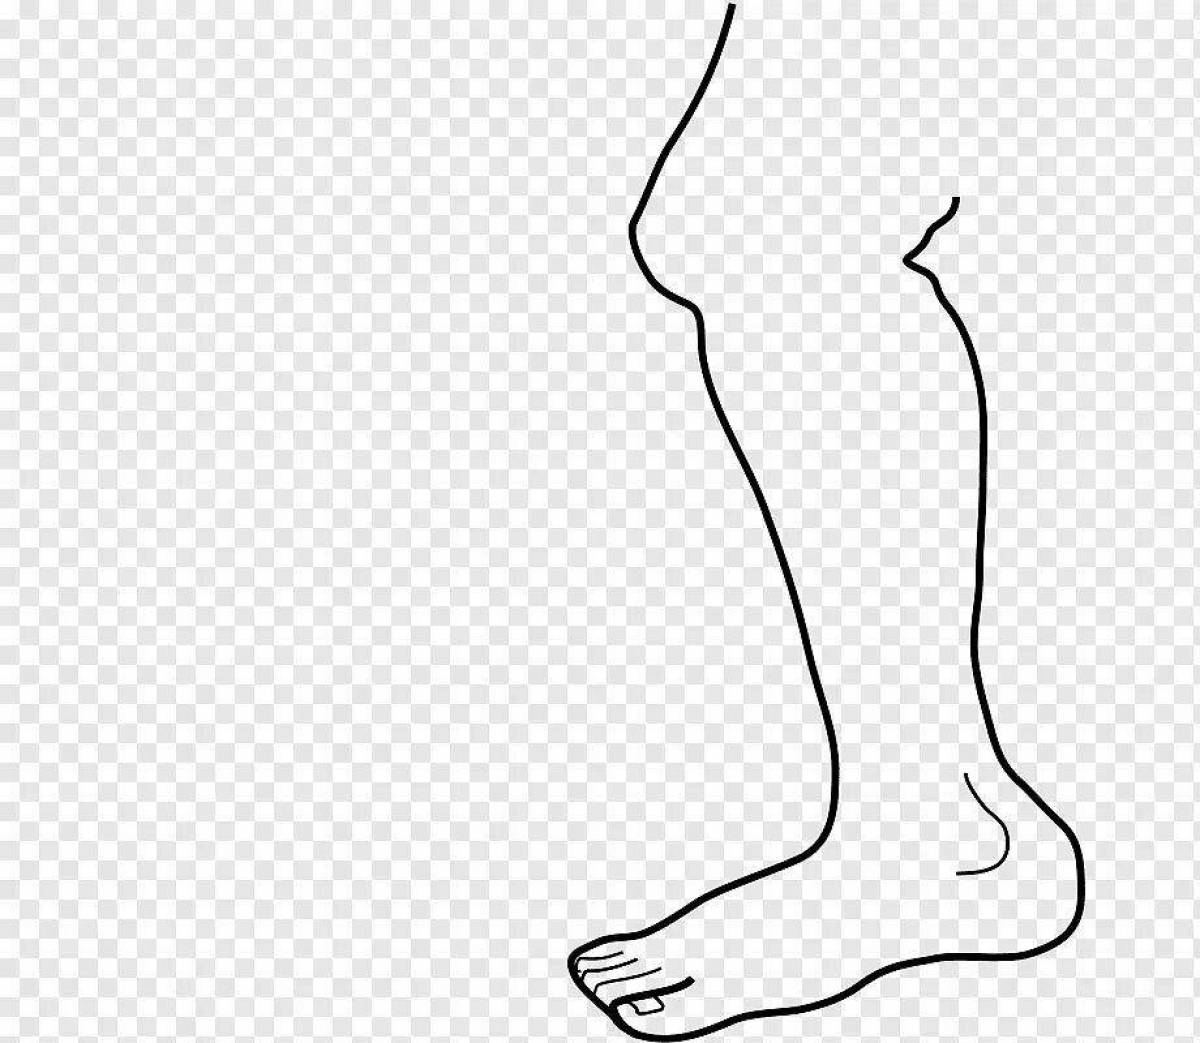 Shiny legs coloring page